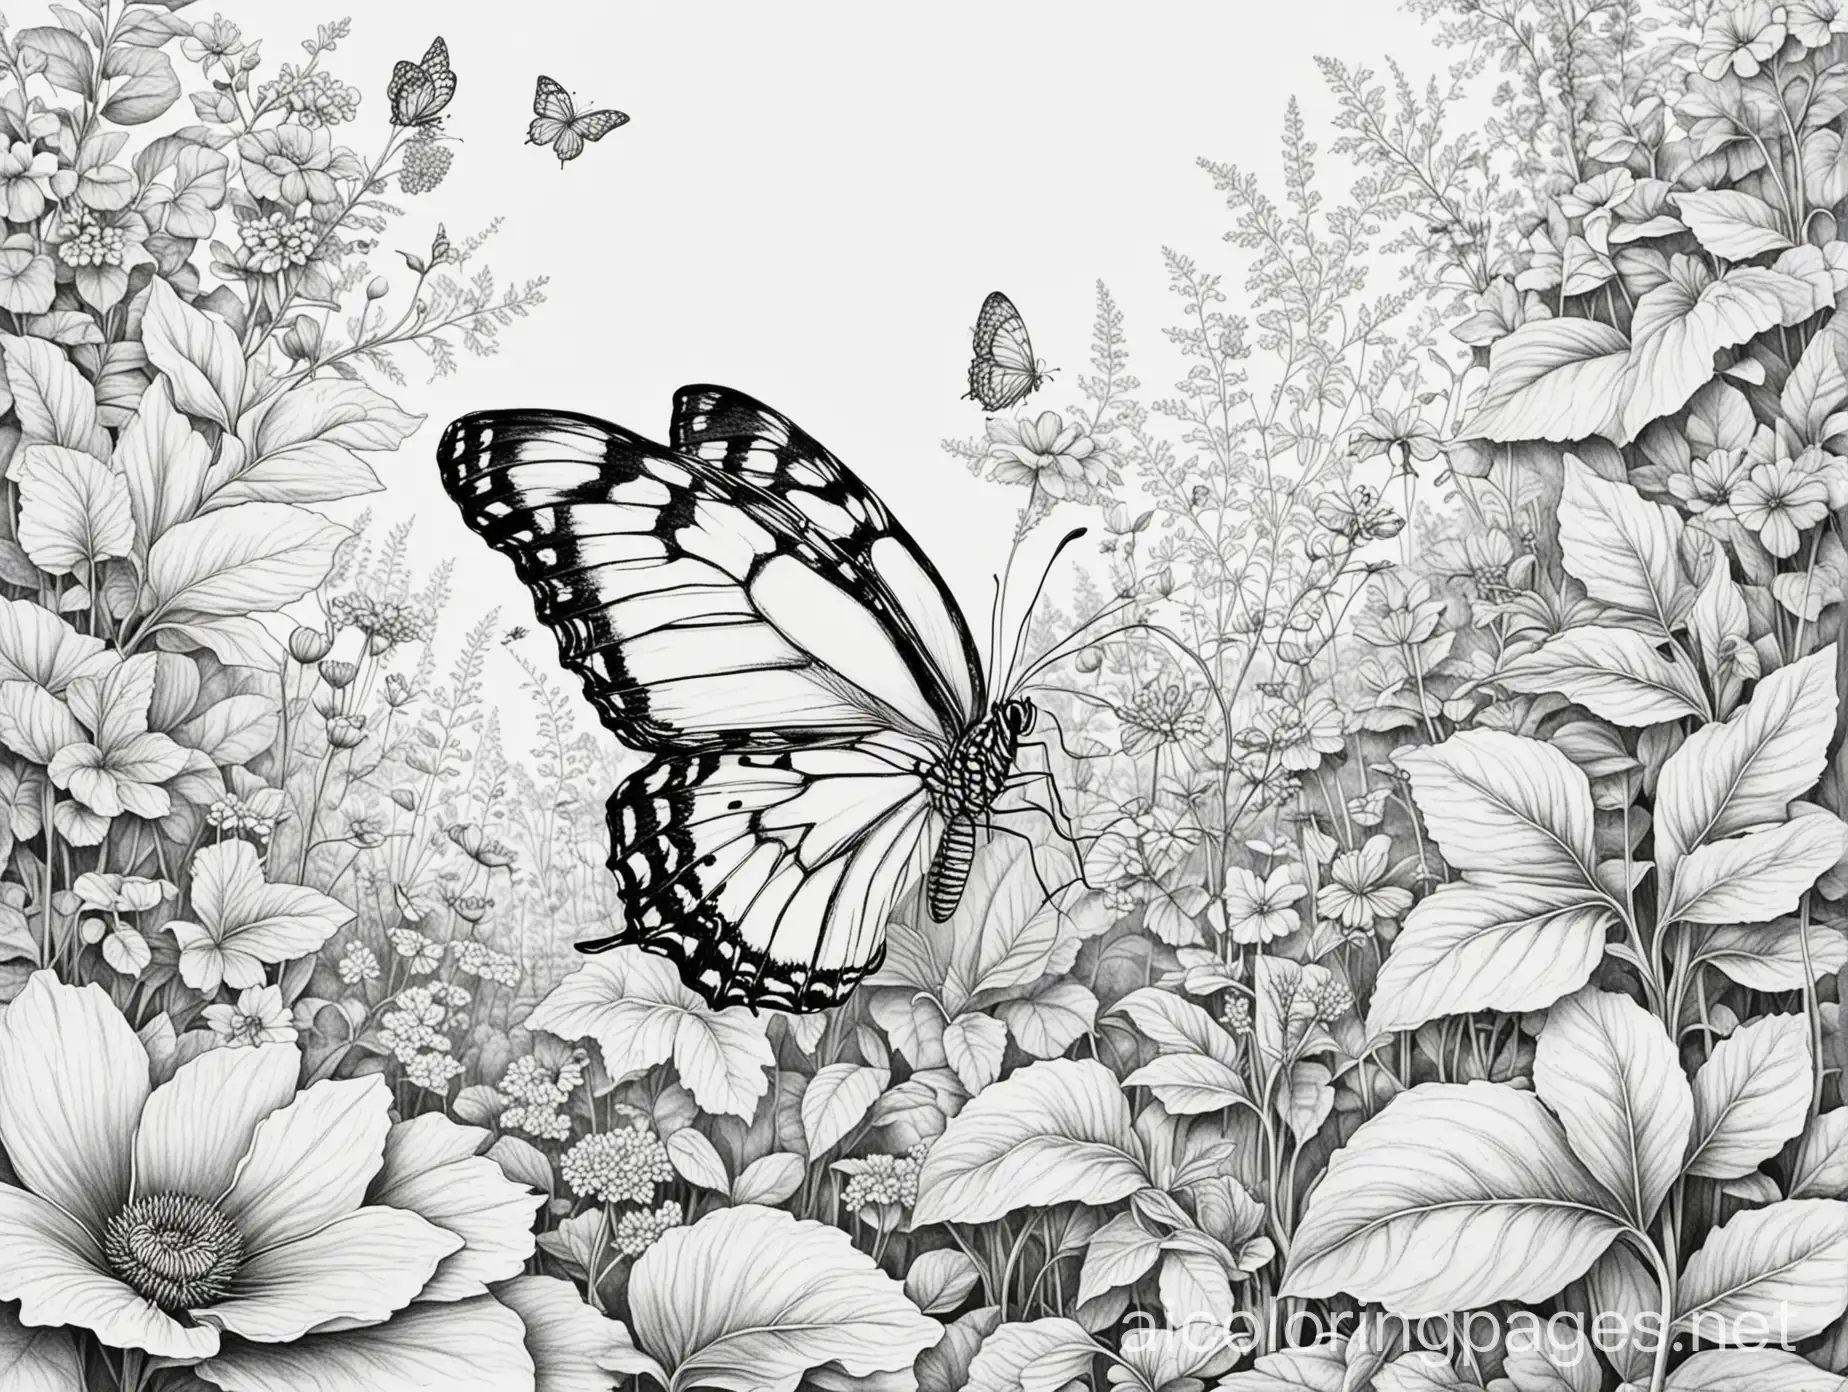 butterfly in the garden, Coloring Page, black and white, line art, white background, Simplicity, Ample White Space. The background of the coloring page is plain white to make it easy for young children to color within the lines. The outlines of all the subjects are easy to distinguish, making it simple for kids to color without too much difficulty